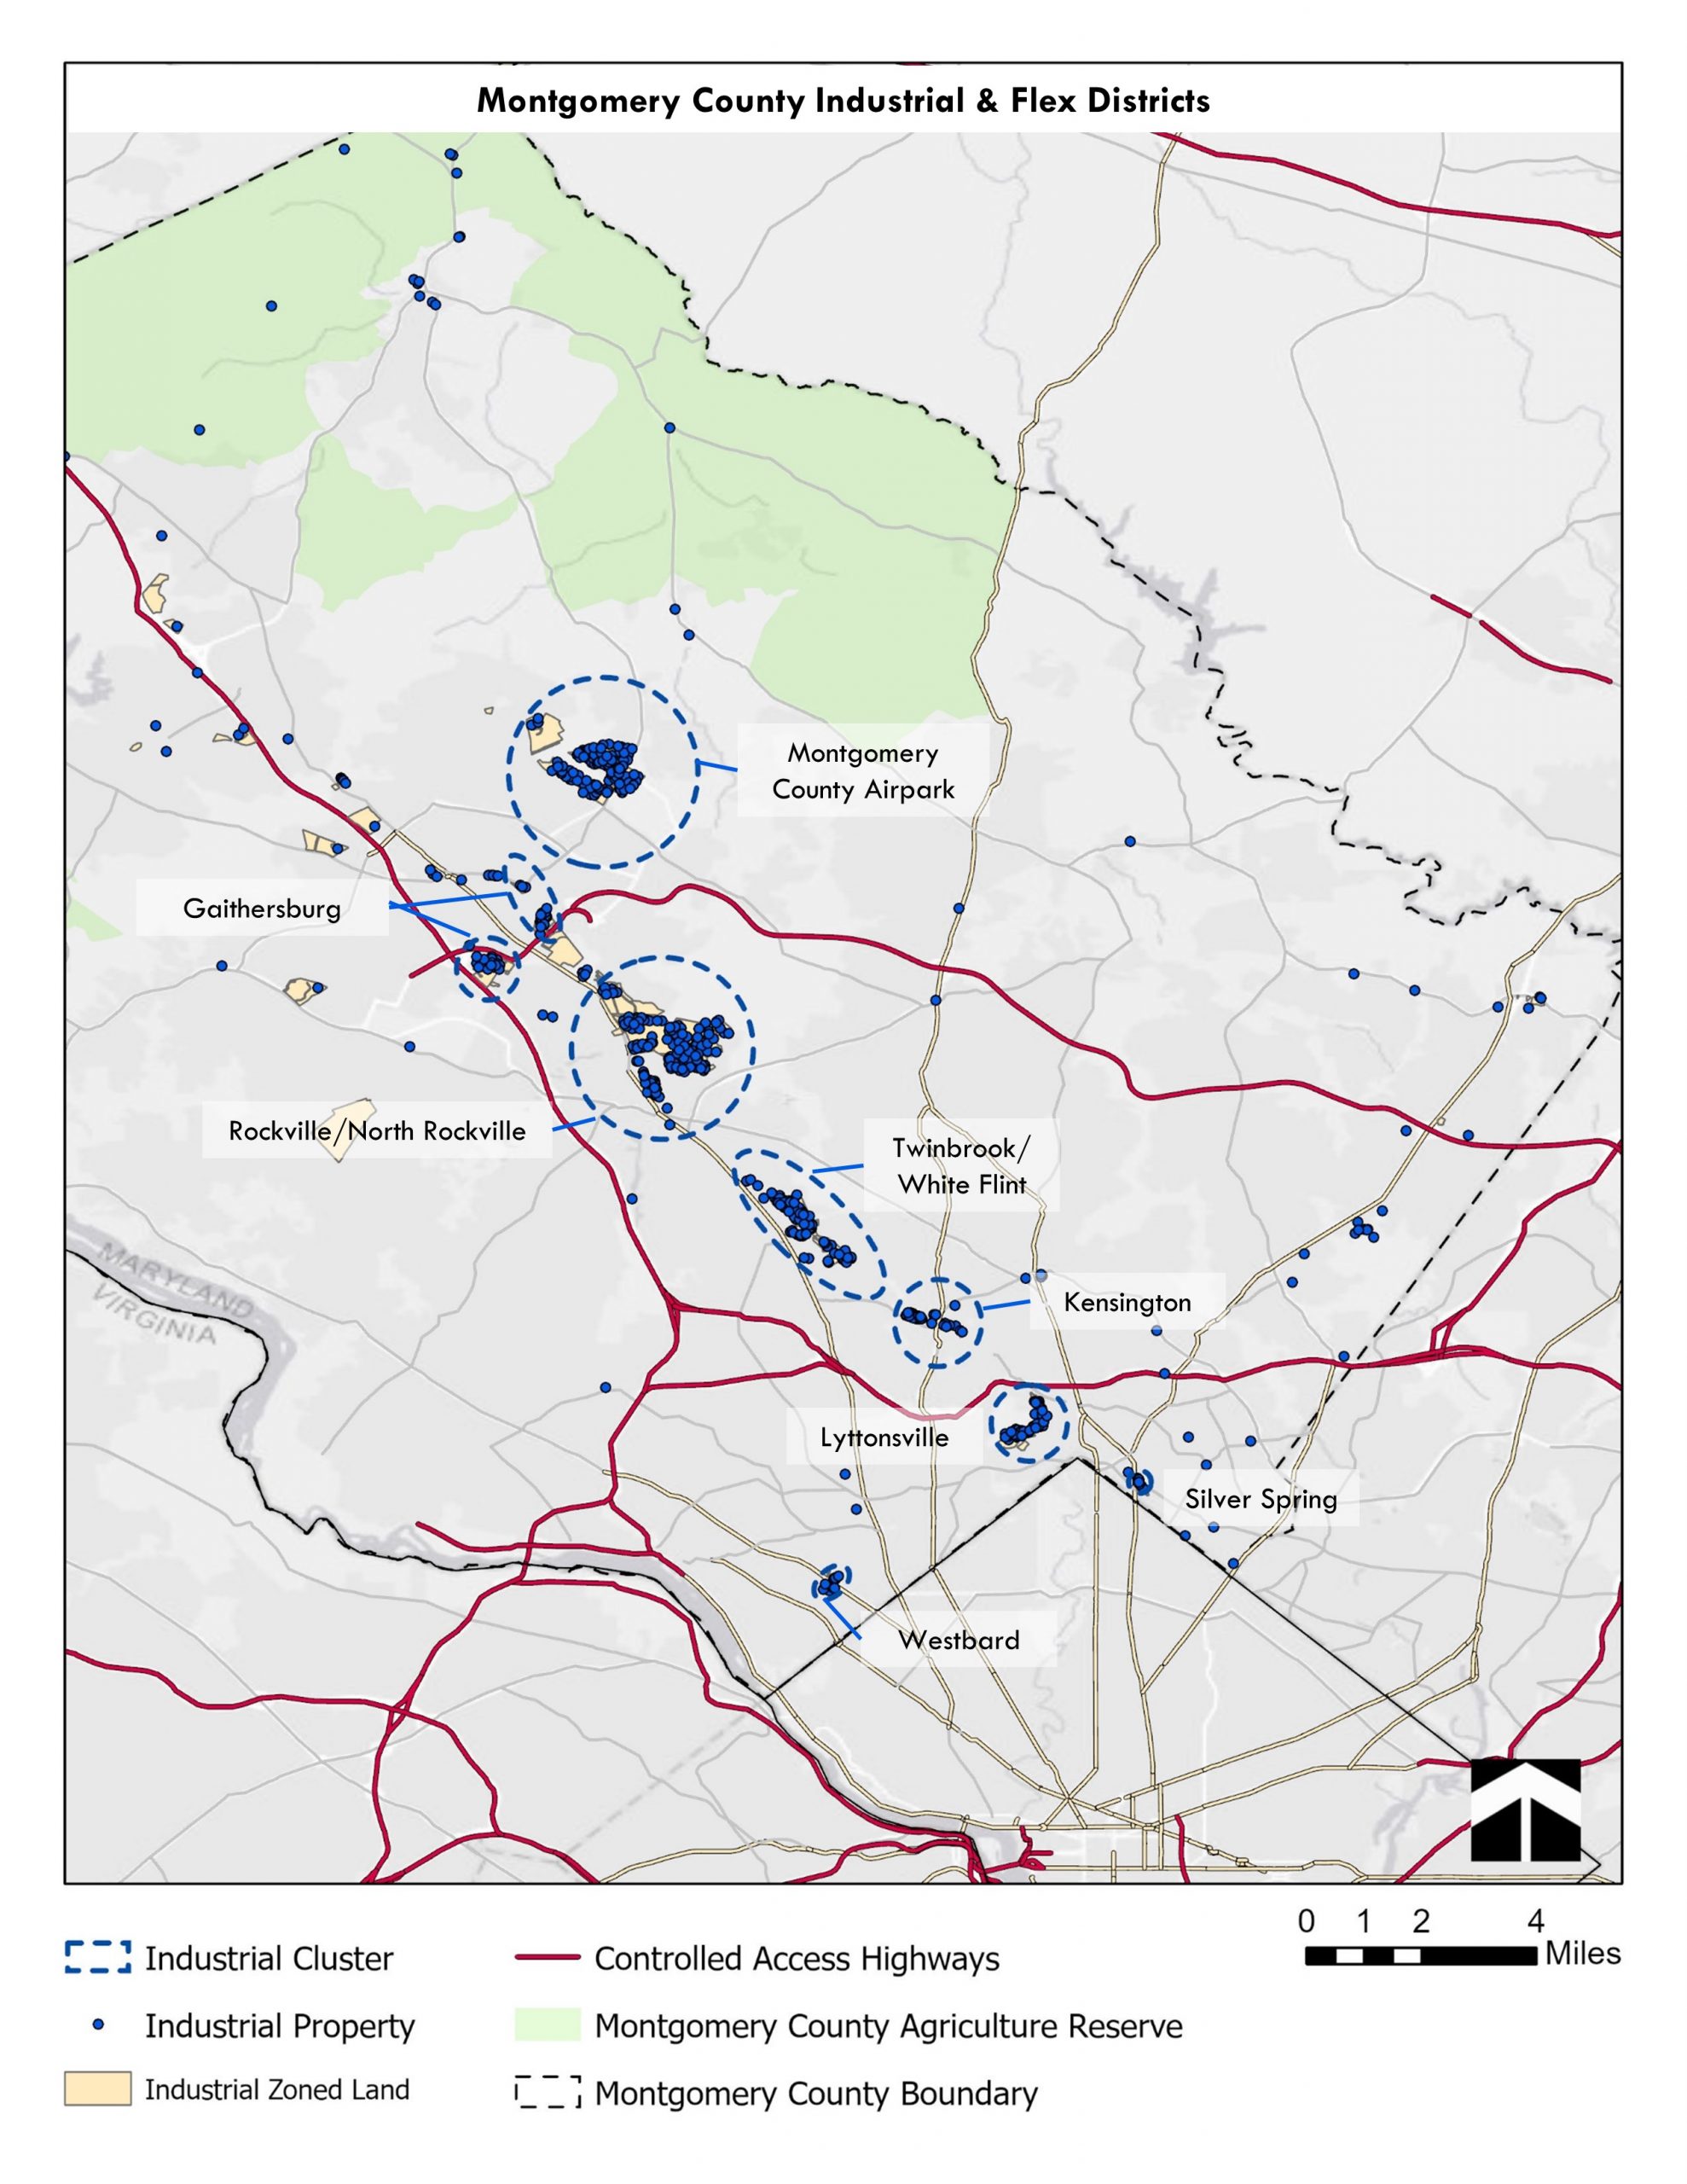 Map showing thatMontgomery County’s industrial properties are located in eight neighborhoods -- Silver Spring, Westbard, Kensington, Lyttonsville, Twinbrook/White Flint, Rockville/North, Rockville, Gaithersburg,Montgomery County Airpark -- in loose clusters of a minimum of 10 properties